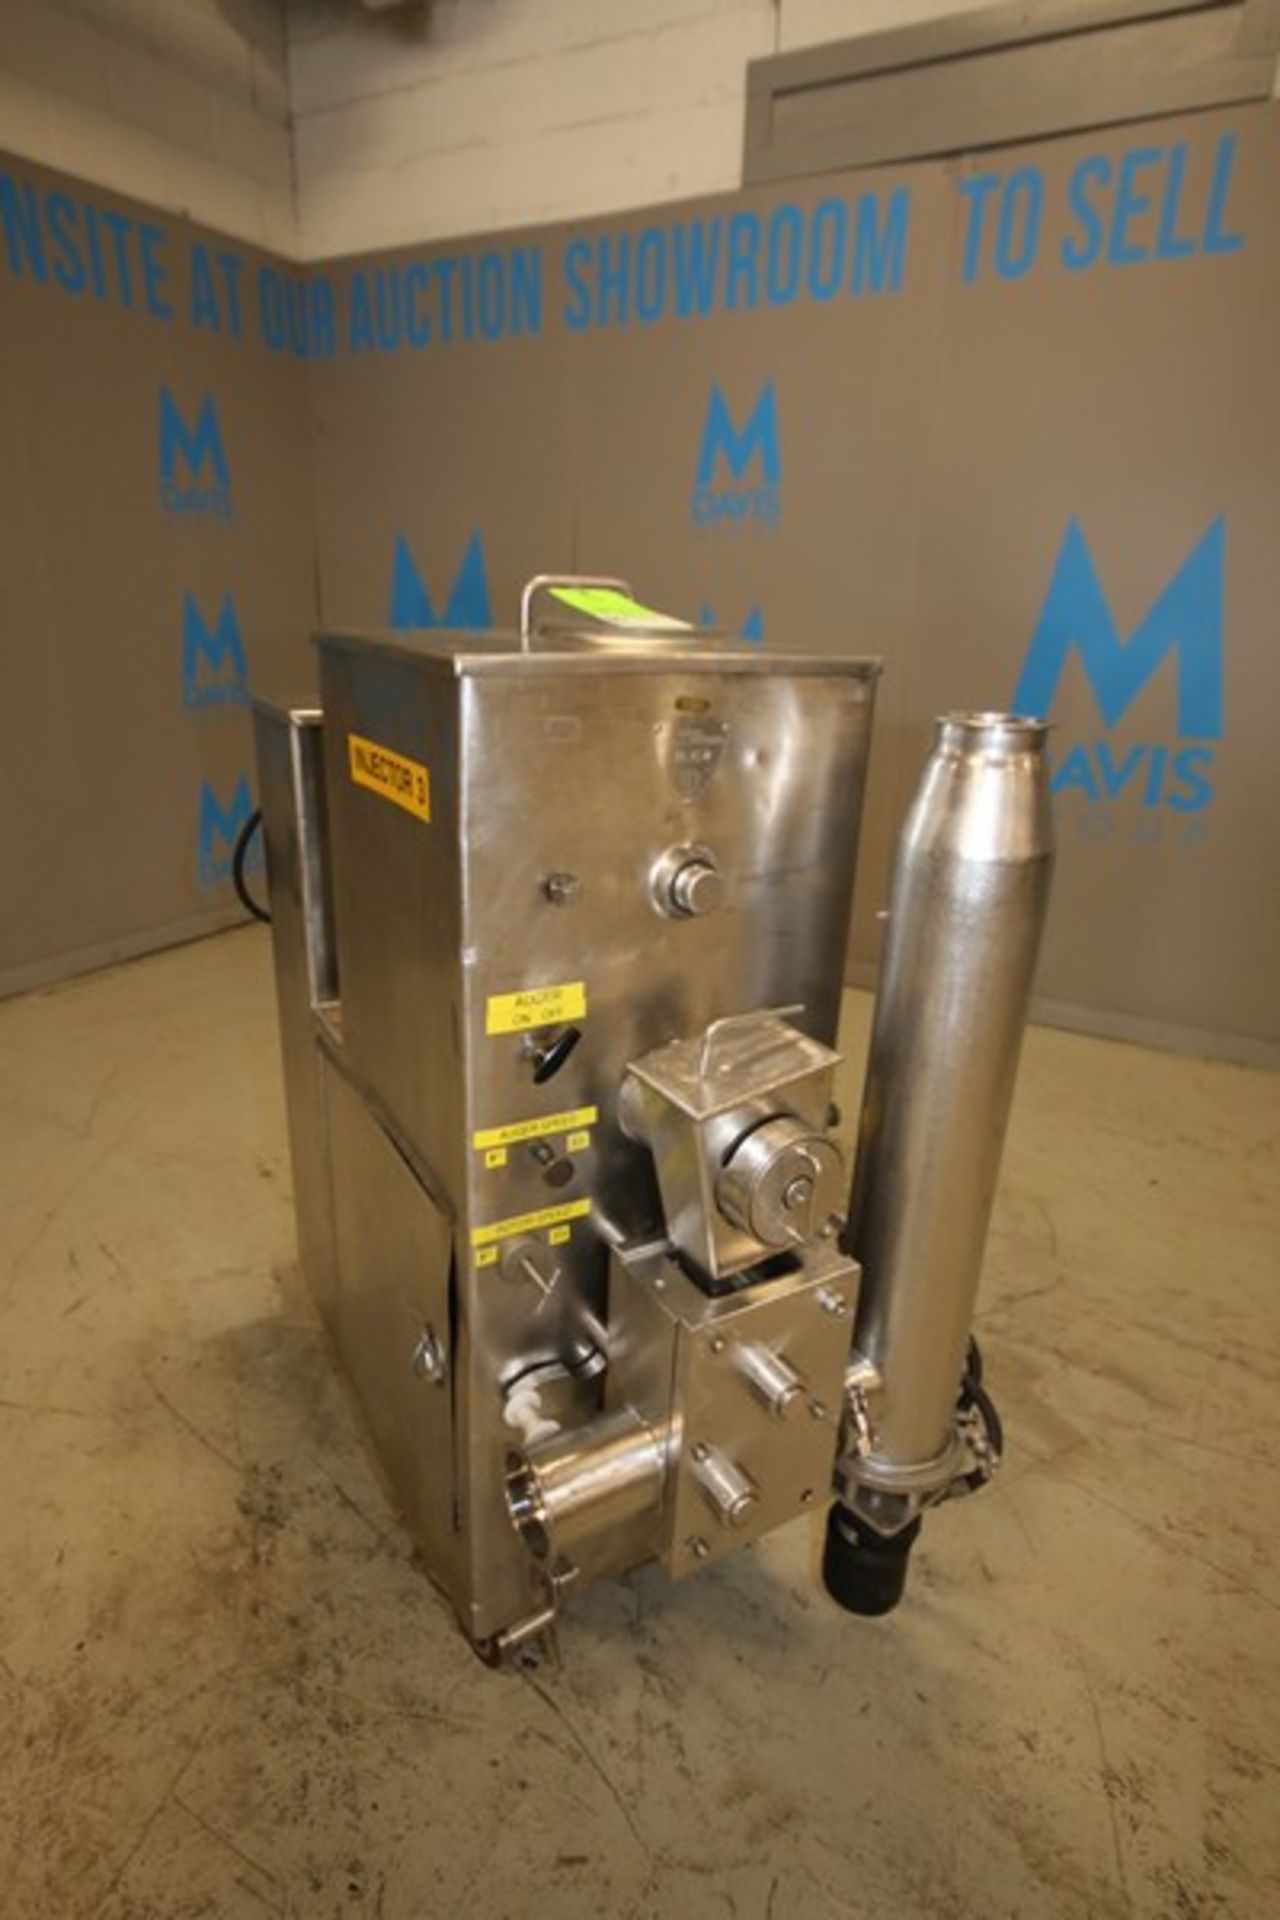 Crepaco S/S Ingredient Feeder / Fruit Feeder, Model FF, SN 1831 (INV#87094)(Located @ the MDG